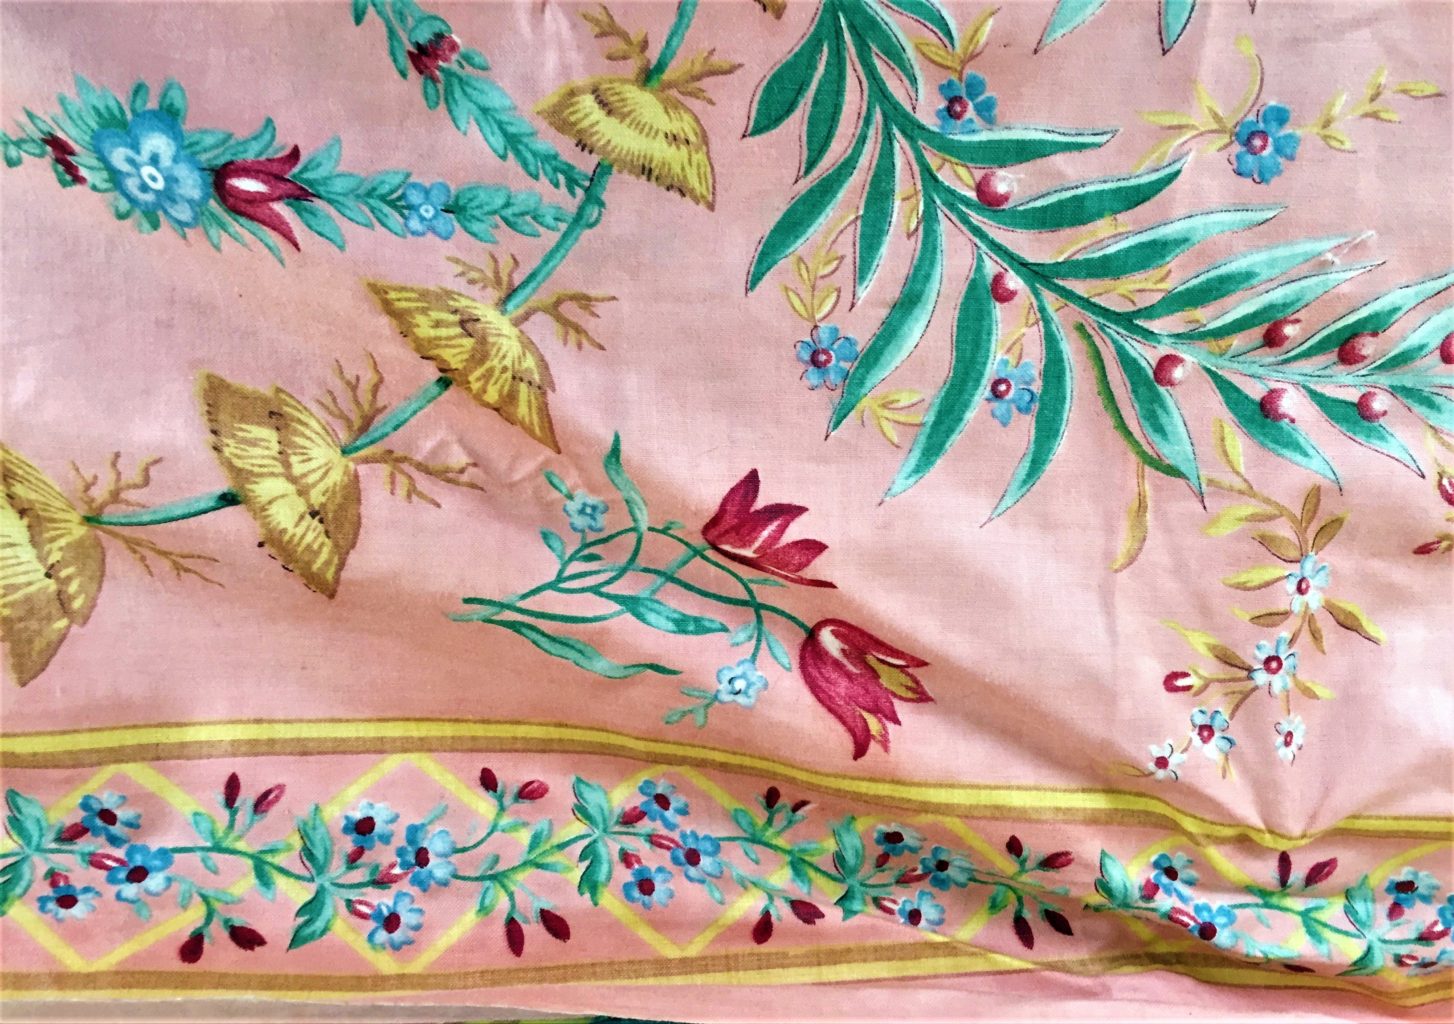 Gorgeous fabric for custom lamps by the Lampshade Lady. Details on The Pillow Goddess blog!